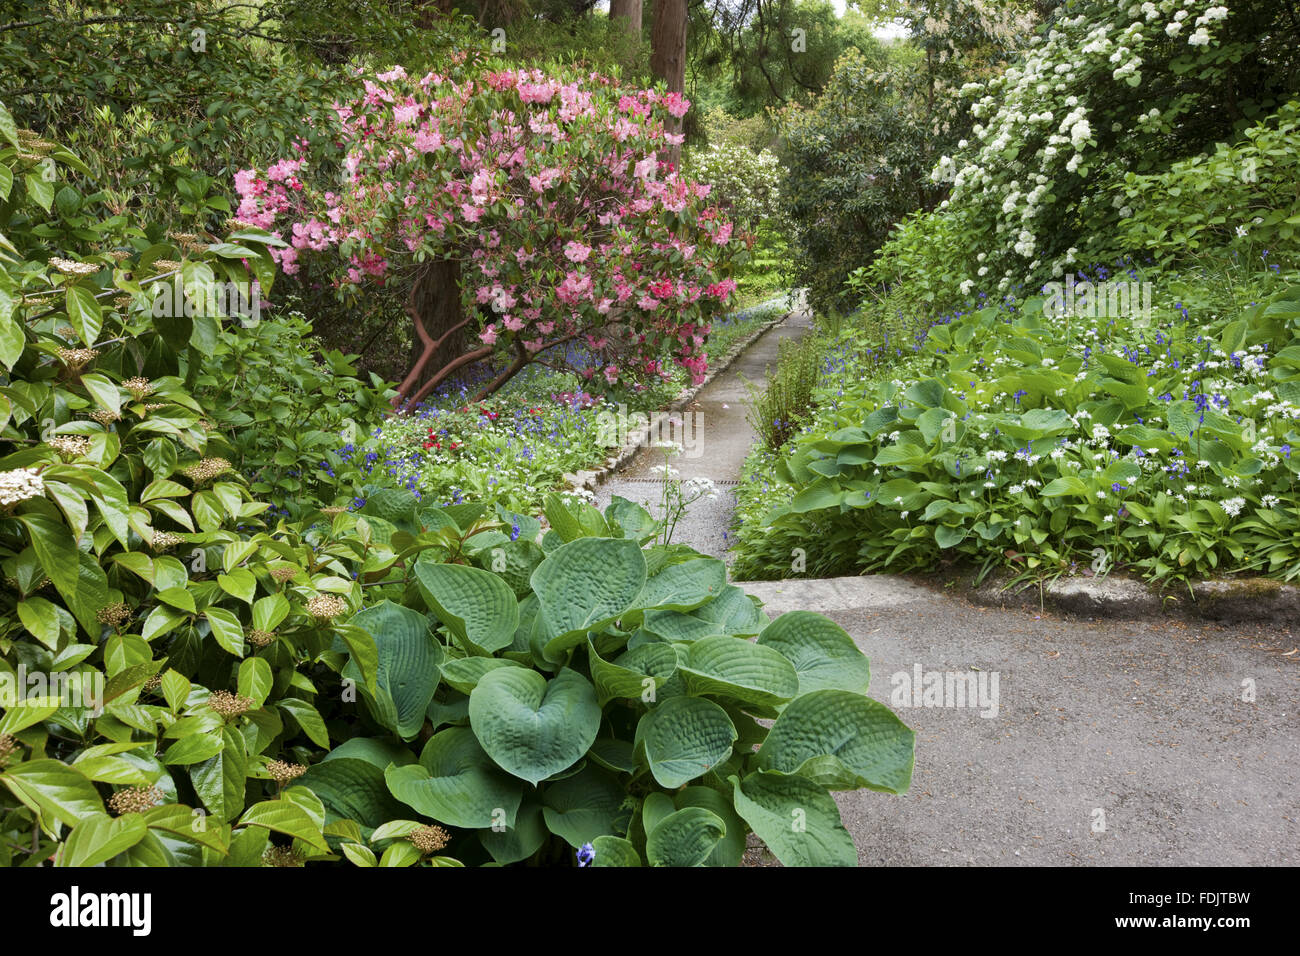 Rhododendron, hostas and bluebells border a path at Trelissick Garden, Cornwall, in May. Stock Photo